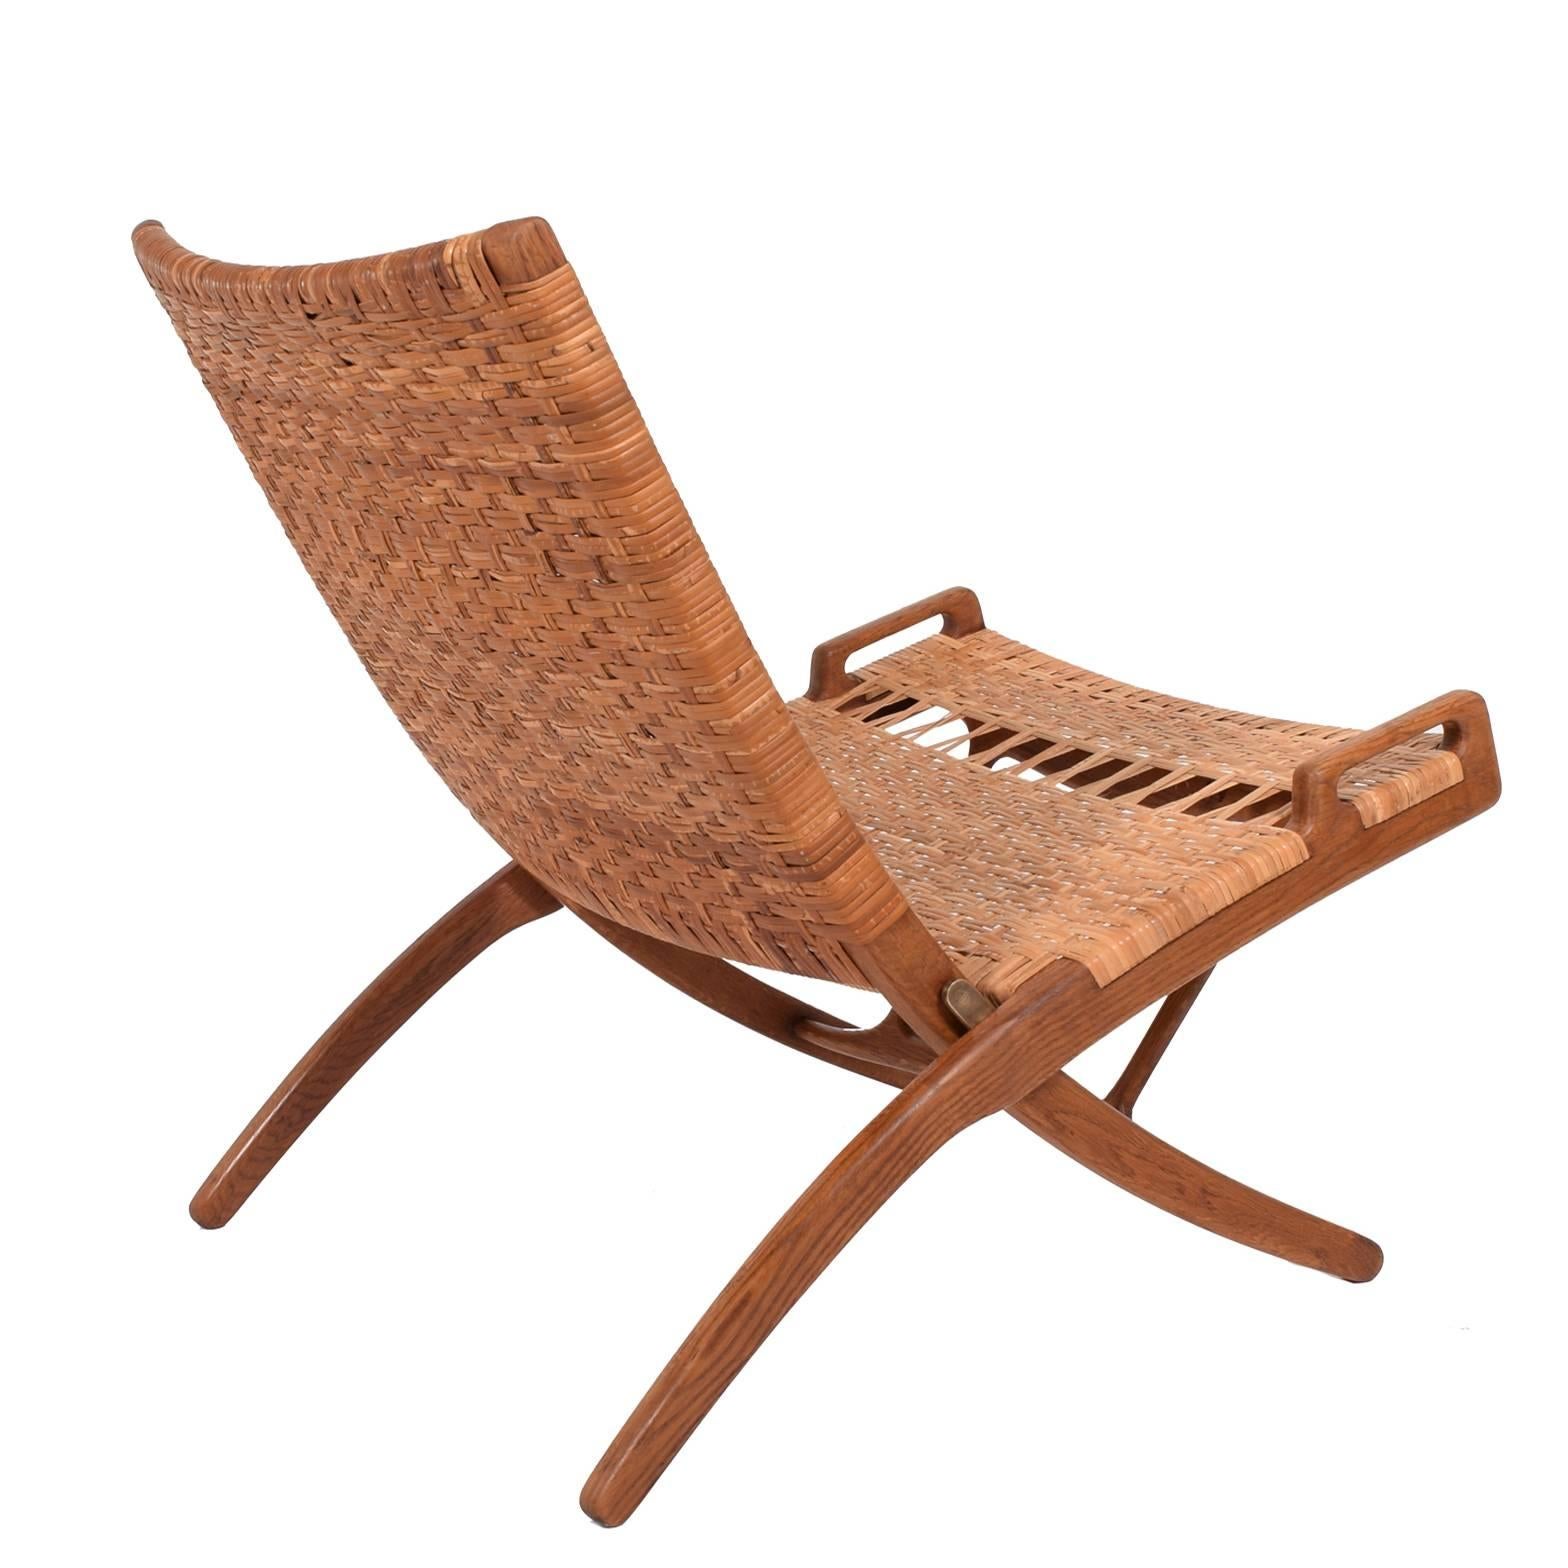 Solid oak and flat-weave cane folding chair with a handle on each side and notched stretcher for hanging. Made by and burn mark signed by Johannes Hansen. Designed 1949.